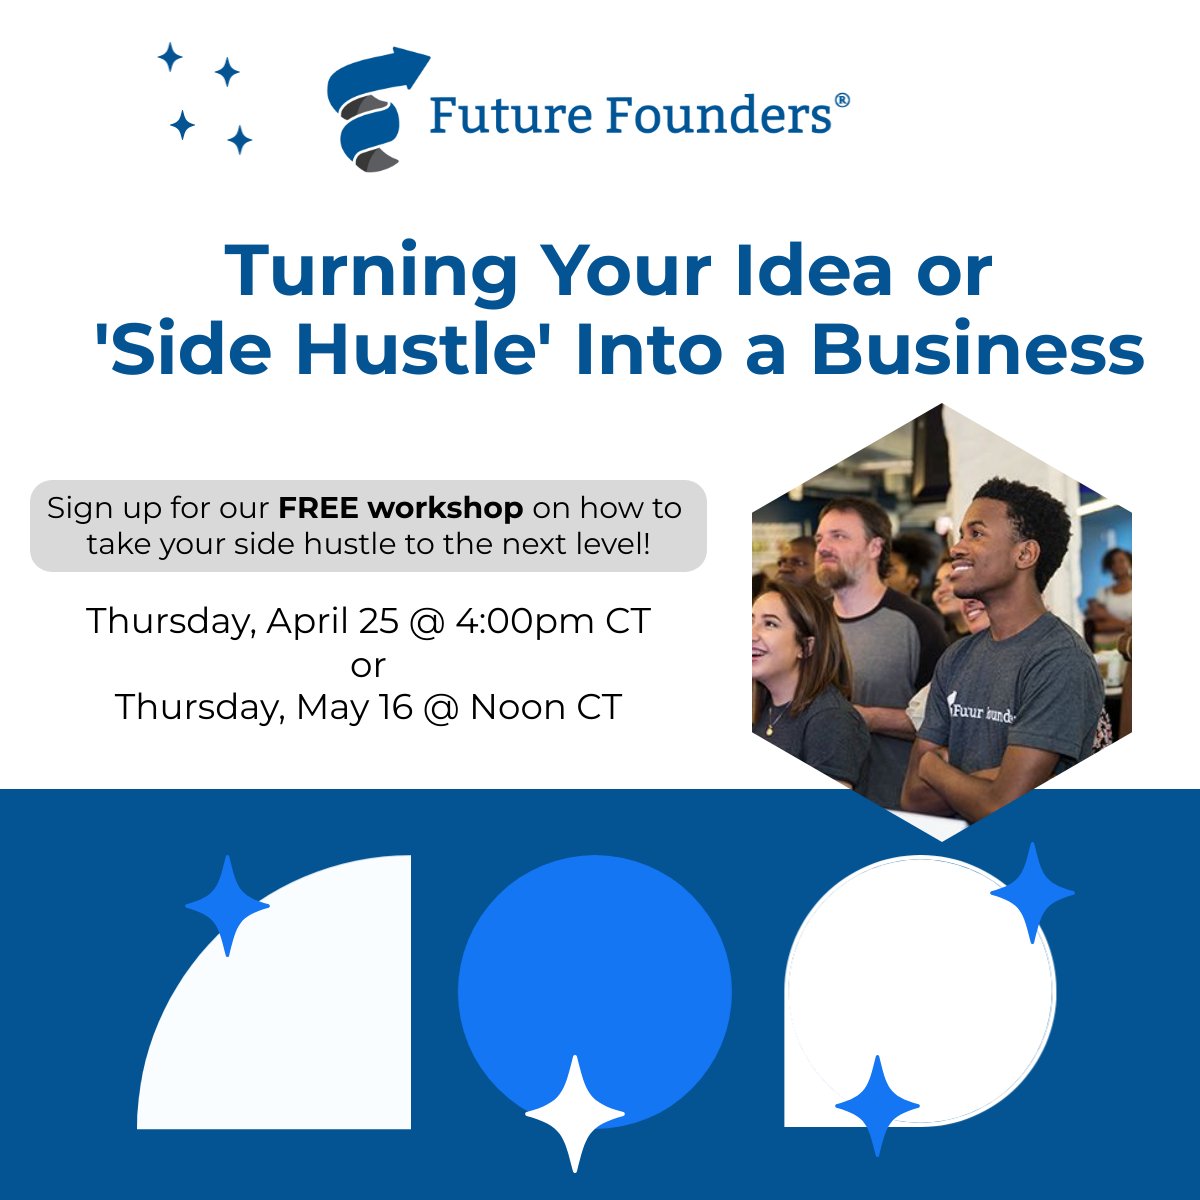 Looking to take your business idea or side hustle to the next level? Join Future Founders on April 25 at 4:00 PM CT for a free virtual workshop developed to help young entrepreneurs (18-30) take the necessary steps to launch and grow their businesses. ow.ly/SaJq50RcgAI